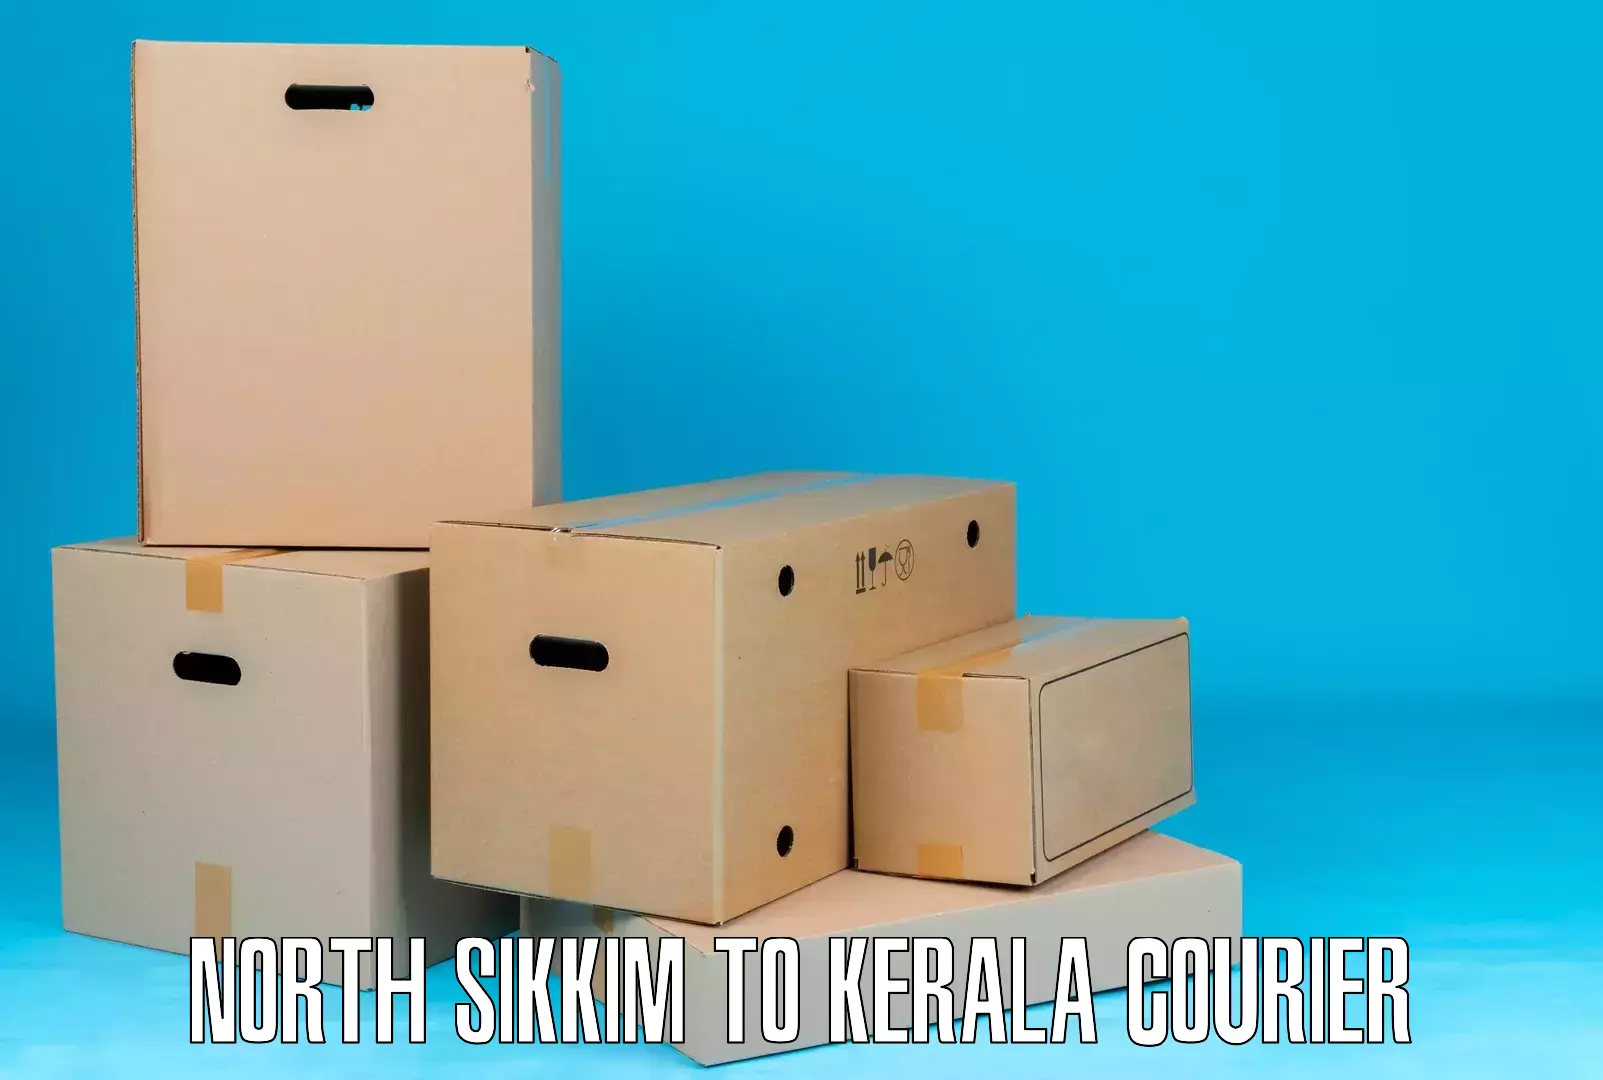 Commercial shipping rates North Sikkim to Kalpetta